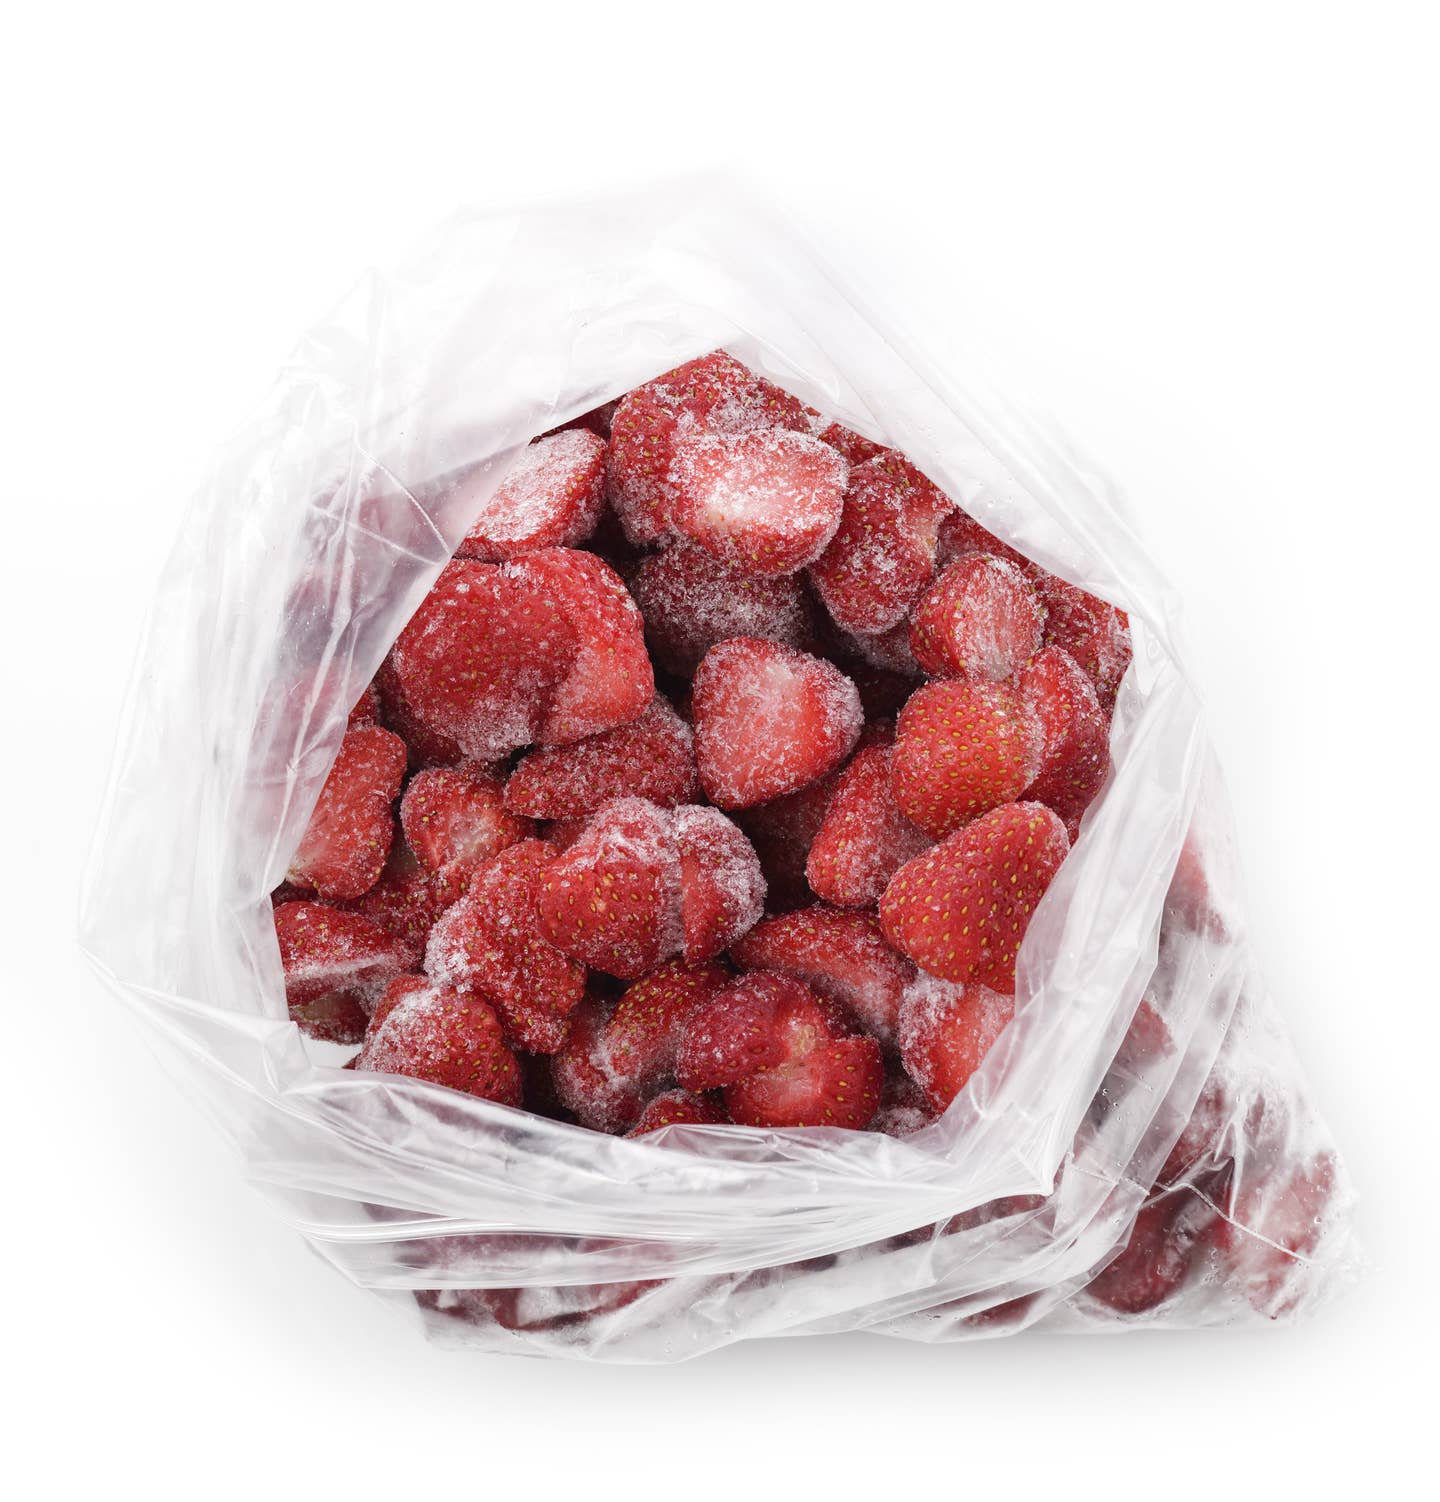 frozen fruit is great for plant-based on a budget